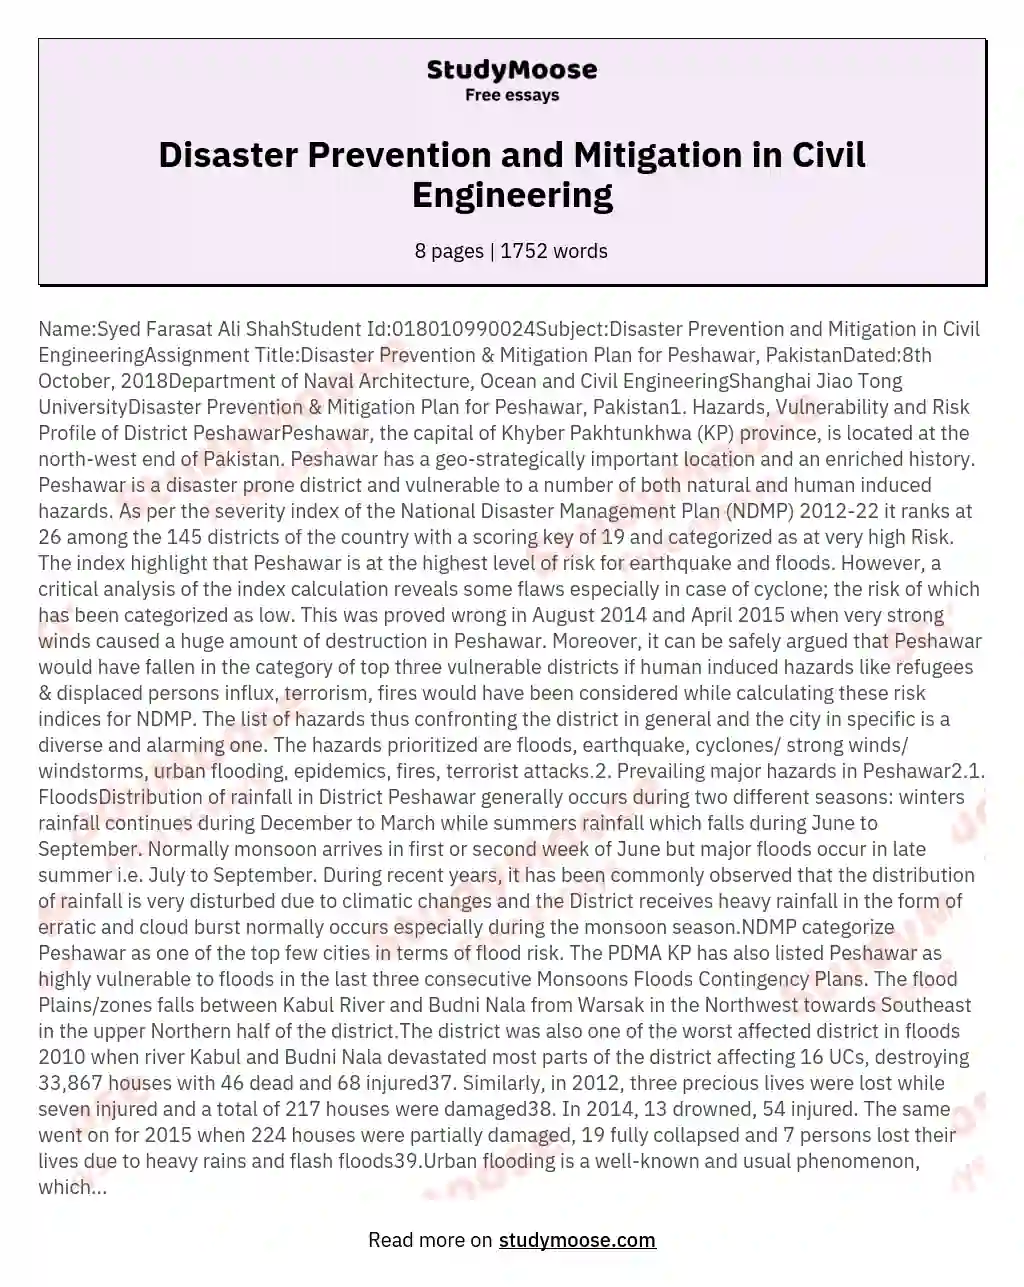 NameSyed Farasat Ali ShahStudent Id018010990024SubjectDisaster Prevention and Mitigation in Civil EngineeringAssignment TitleDisaster